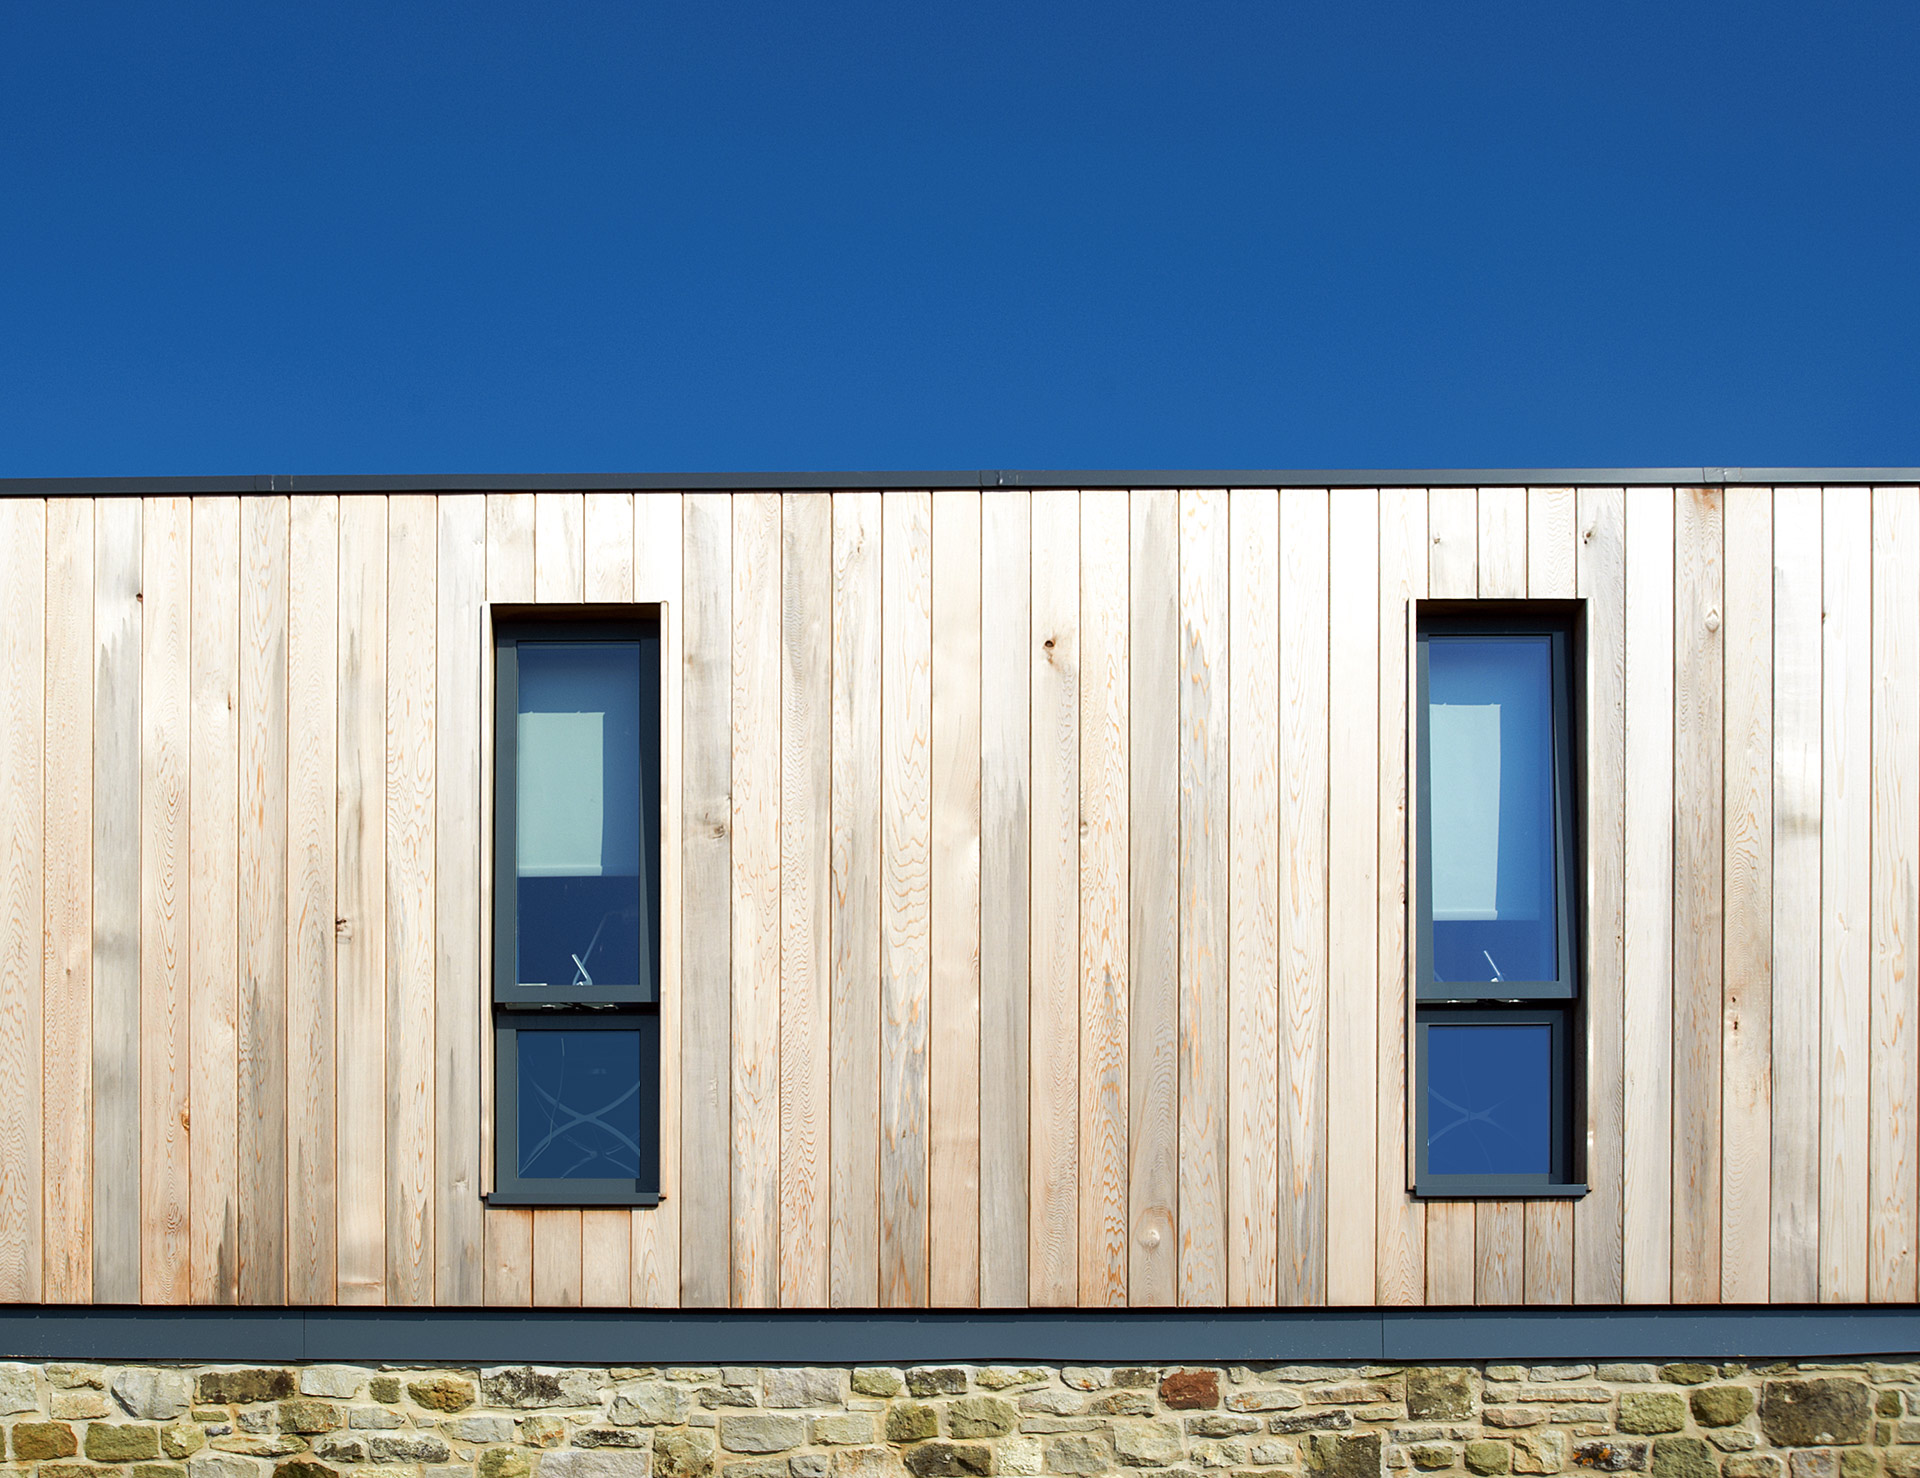 detail of timber cladding on first floor with windows